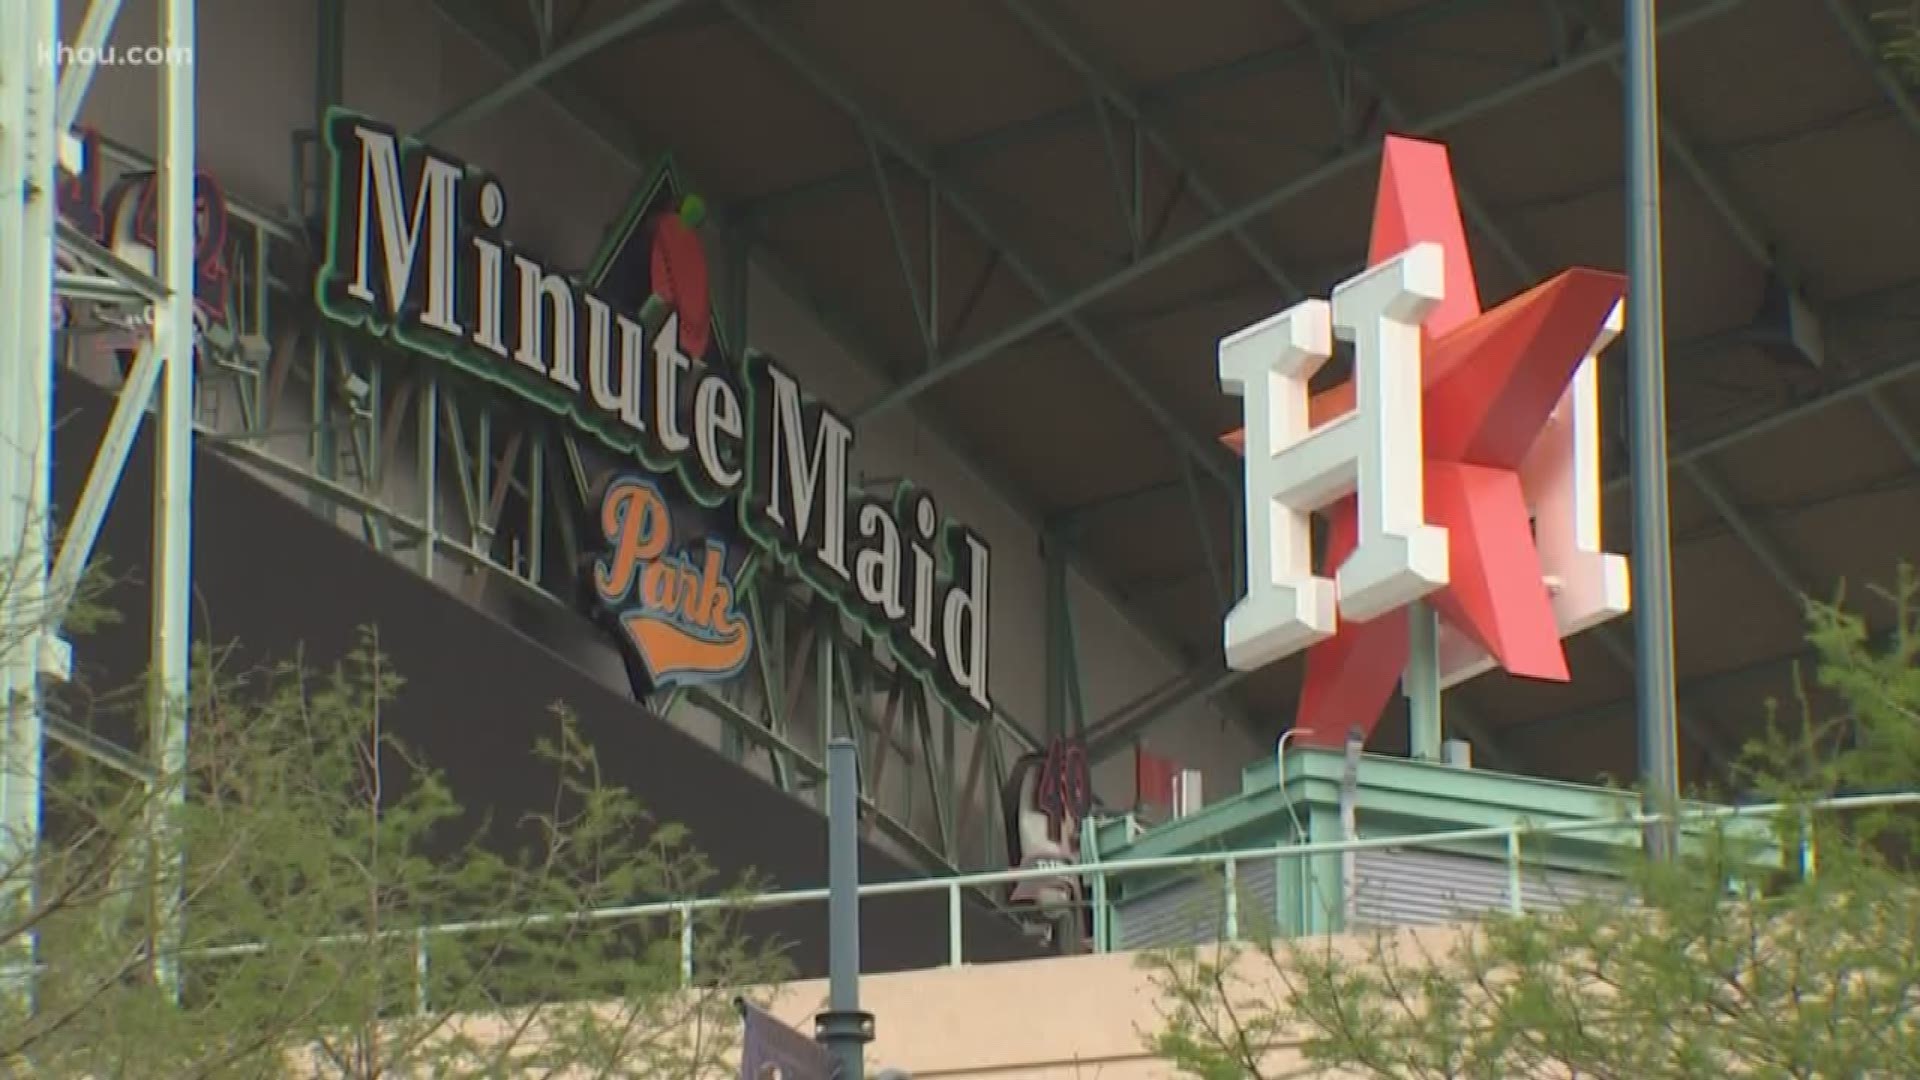 We're counting down to the Astros home-opener tonight! And if you're heading to Minute Maid for the big game, make sure to get there early for all the pre-game festivities.